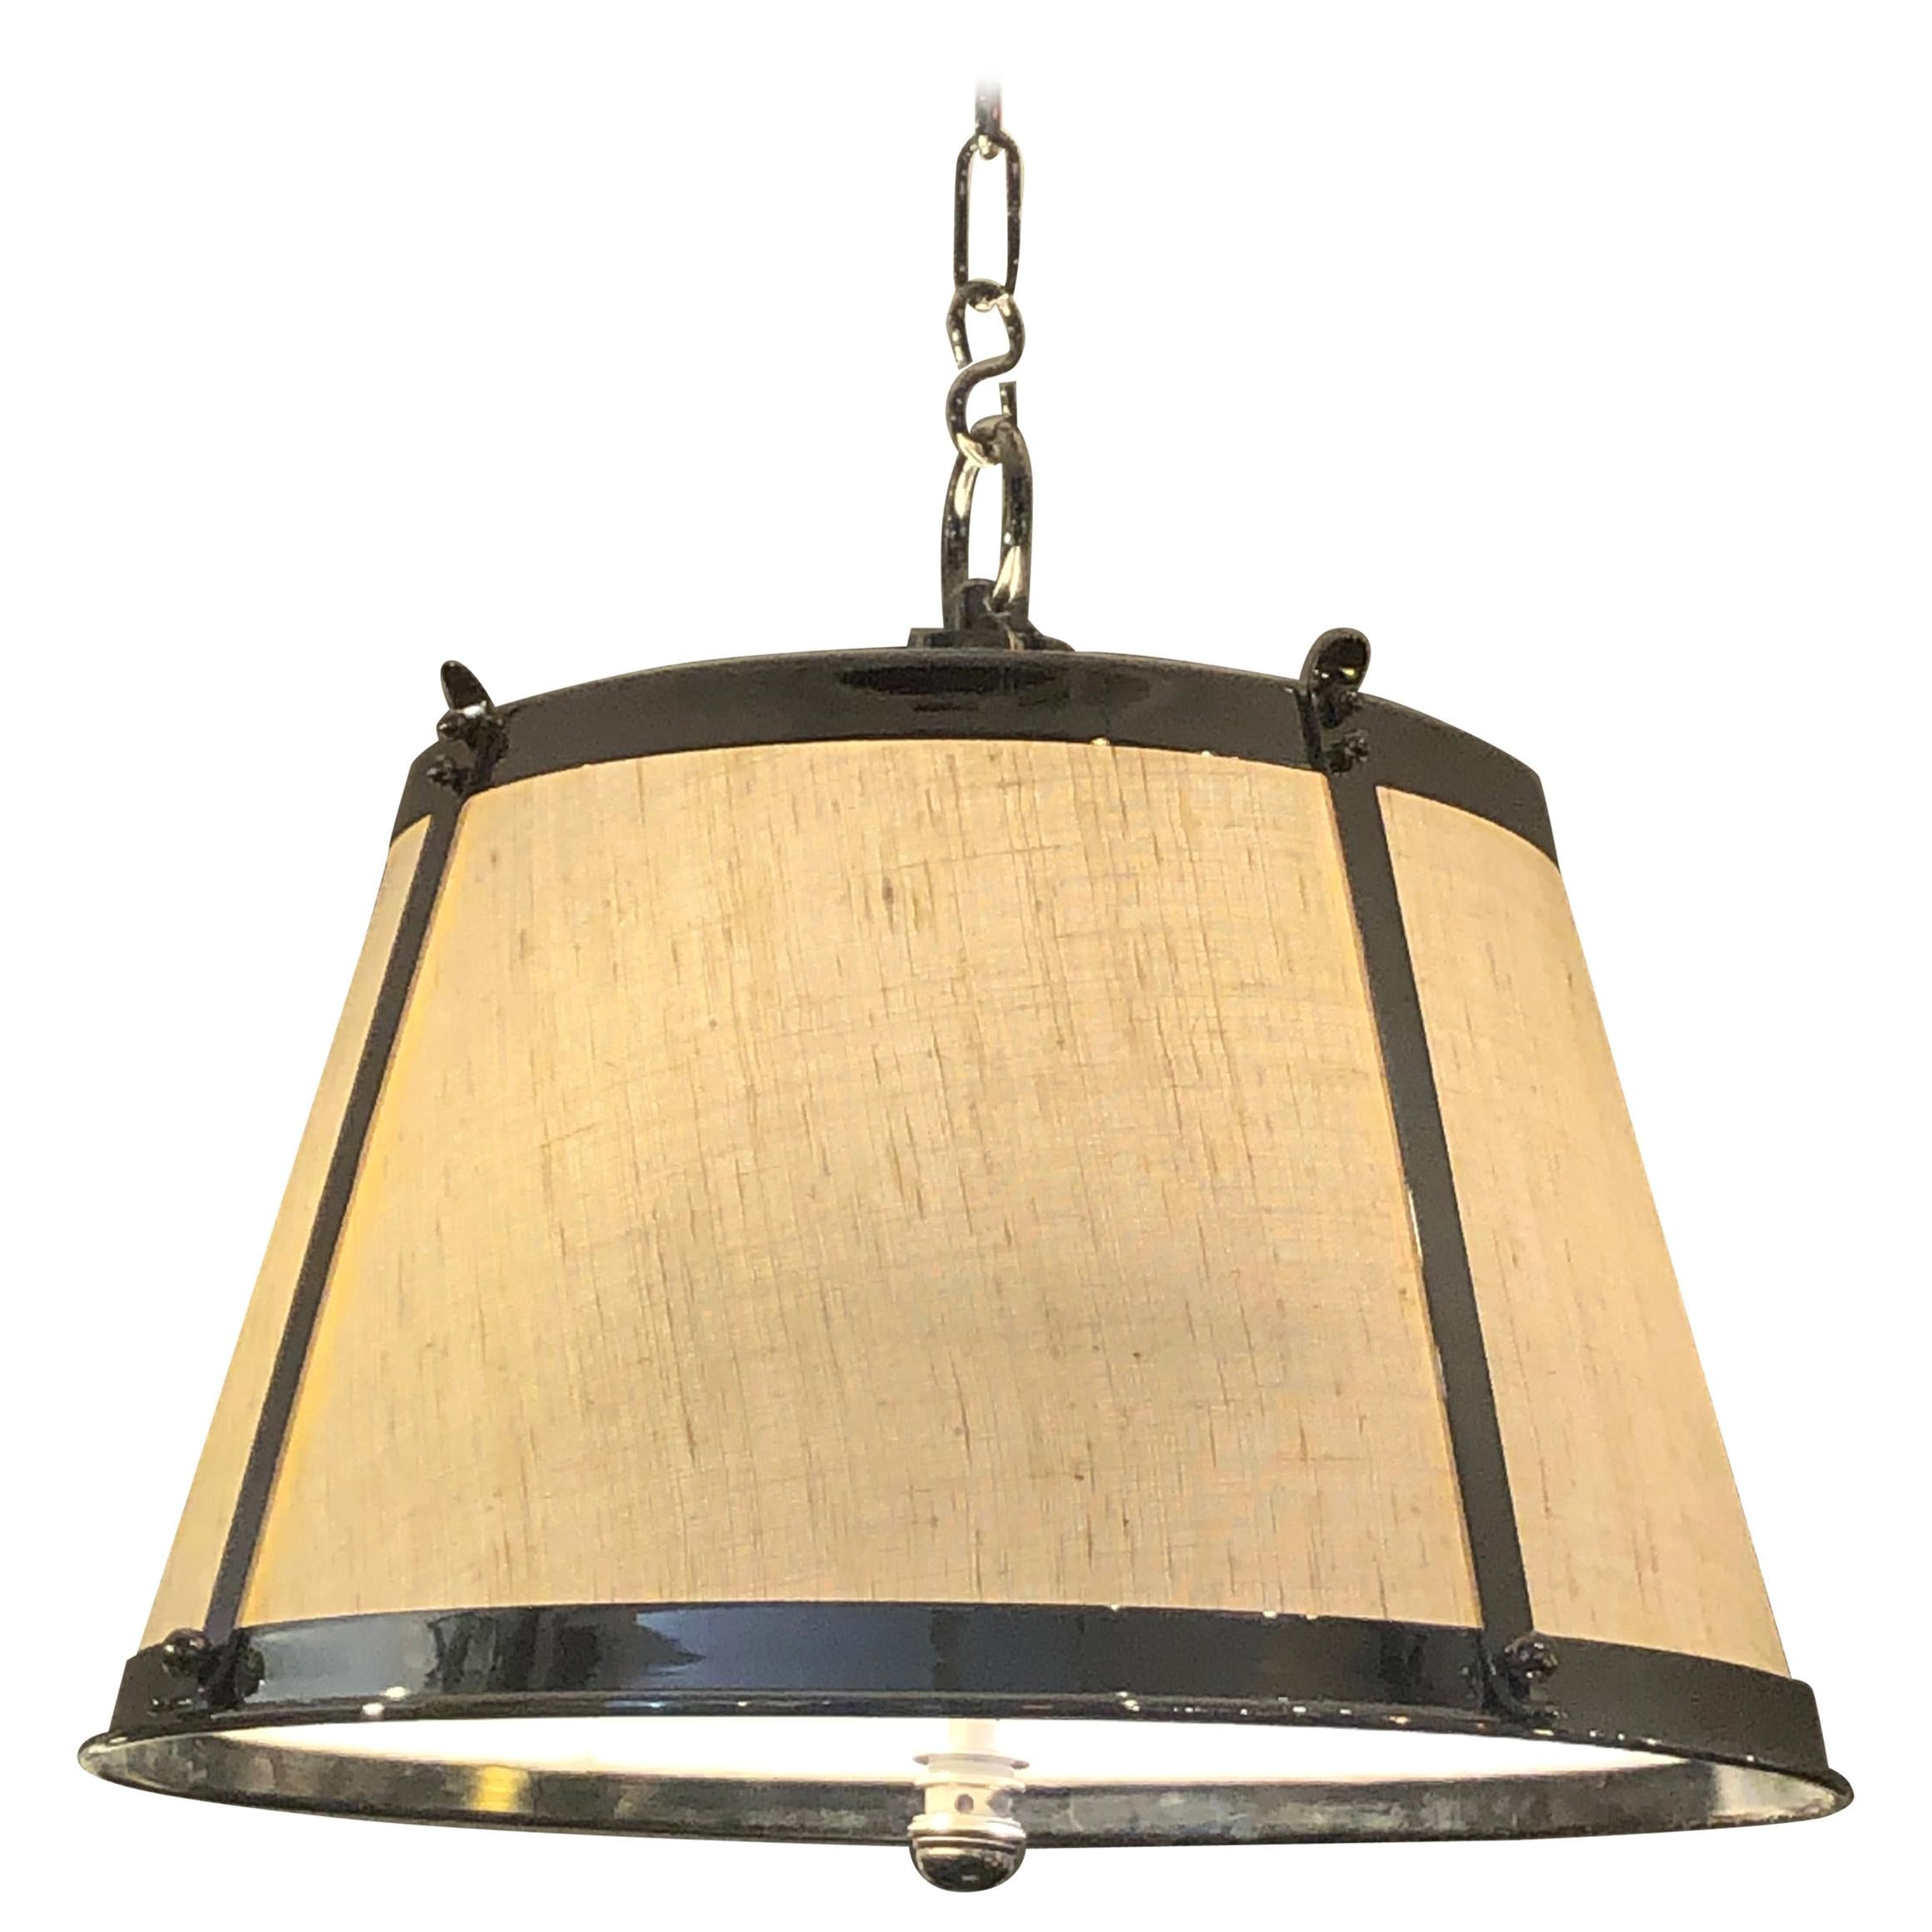 Stunning Linen and Polished Nickel Contemporary Chandelier